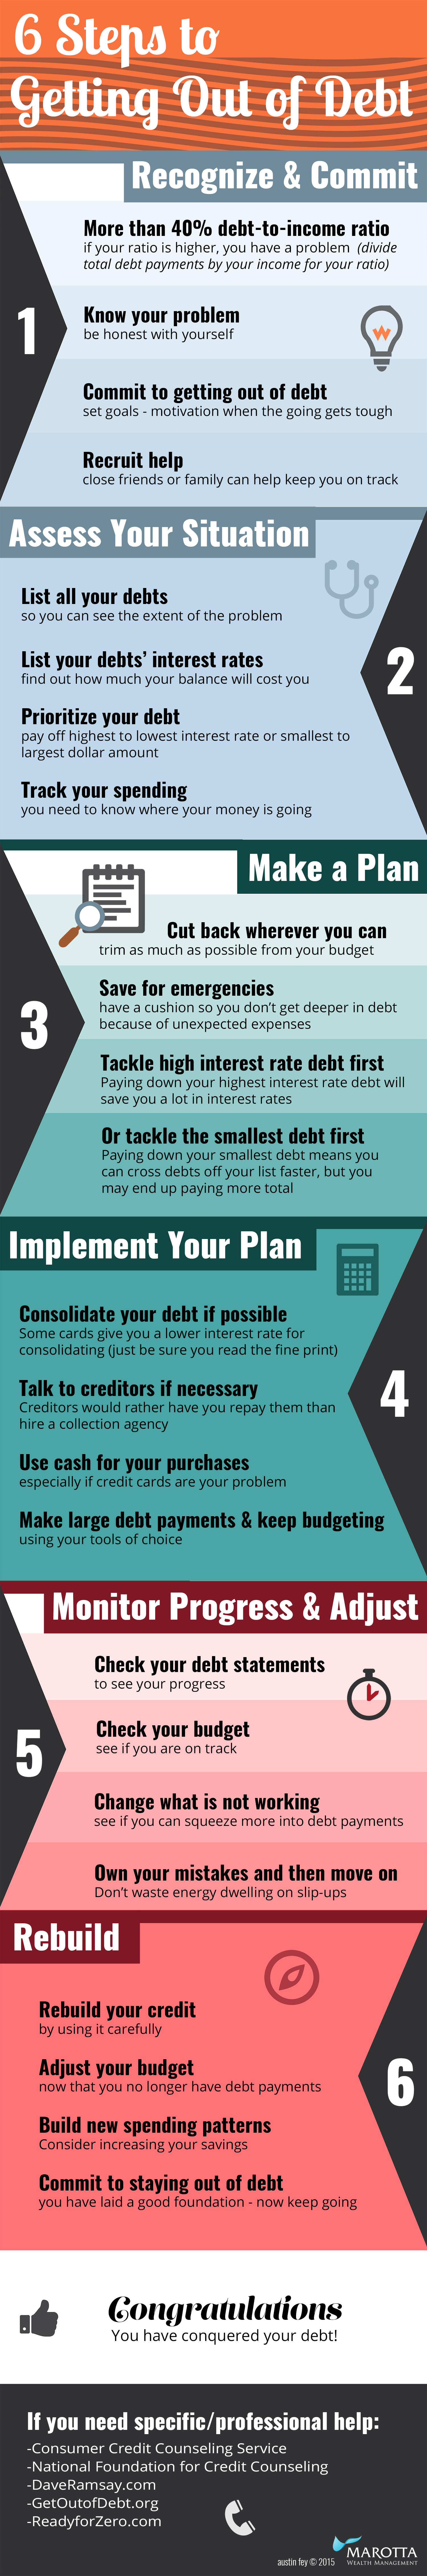 Get out of debt infographic